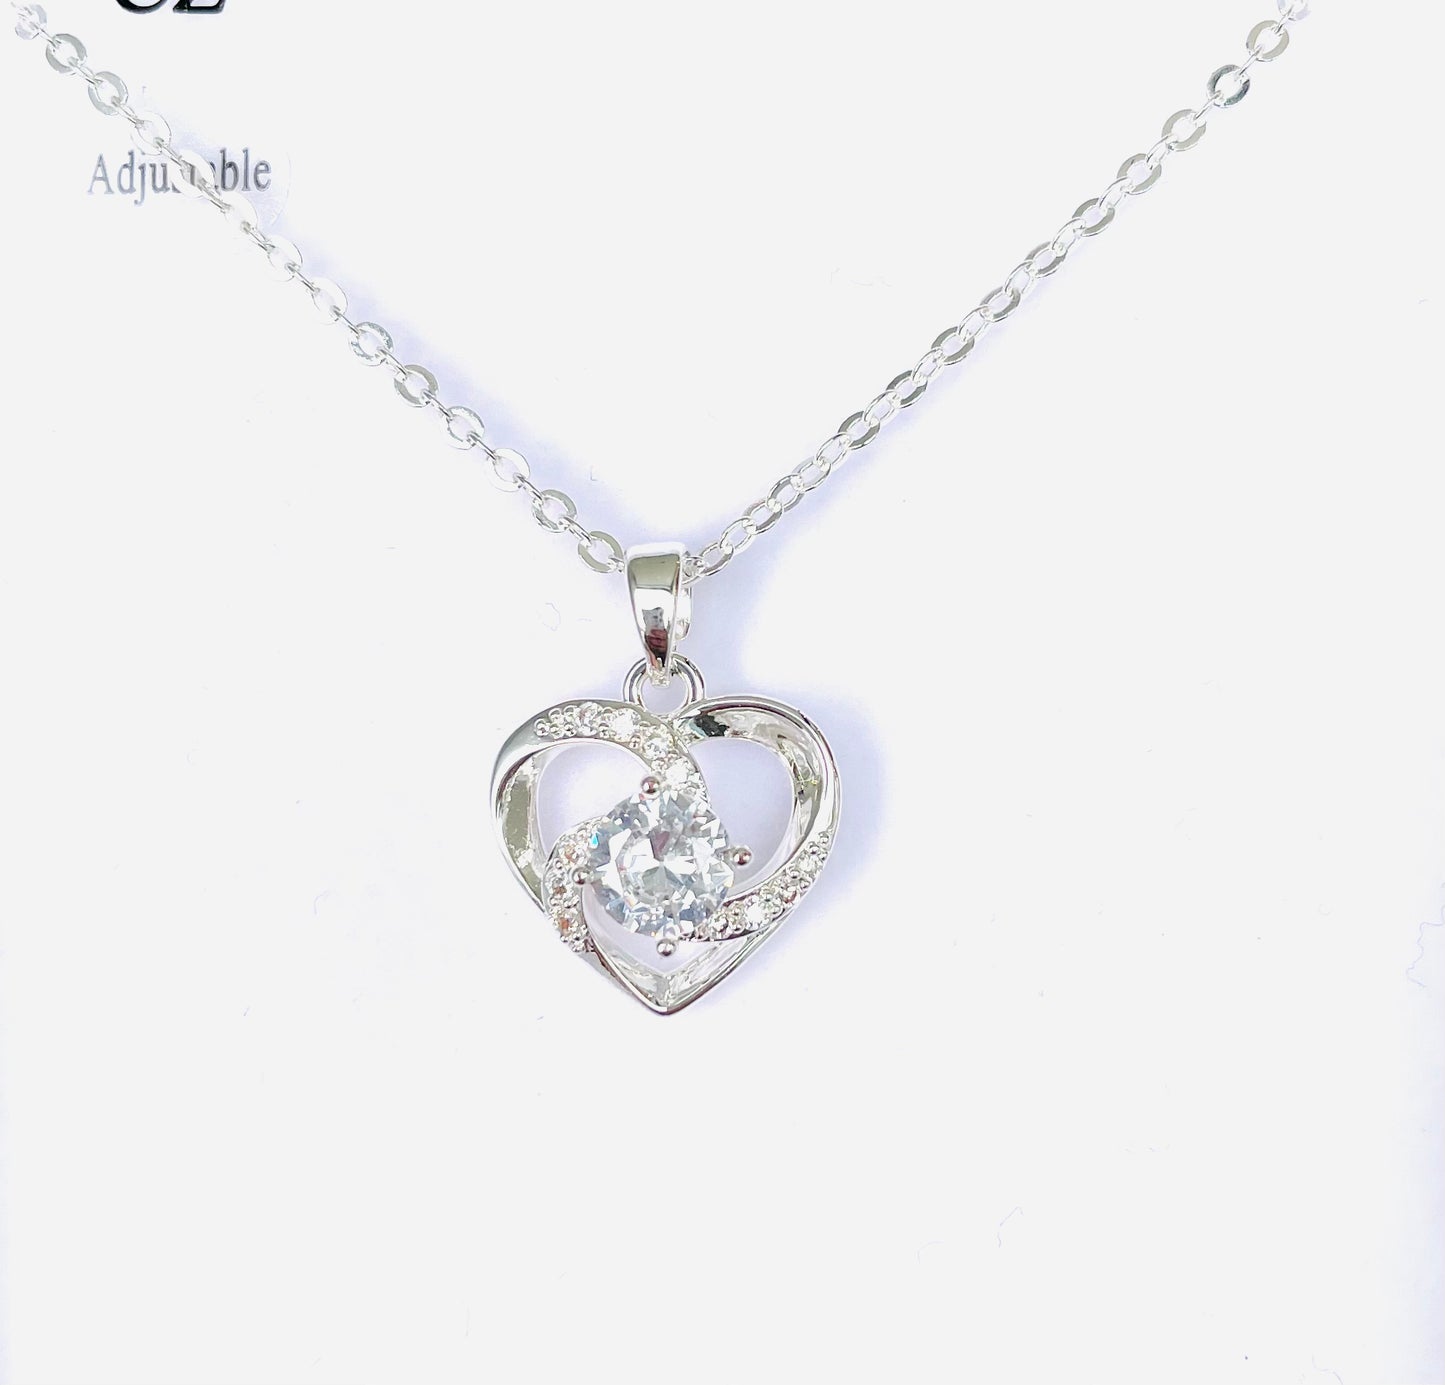 Swirly Heart Silver Plated Necklace